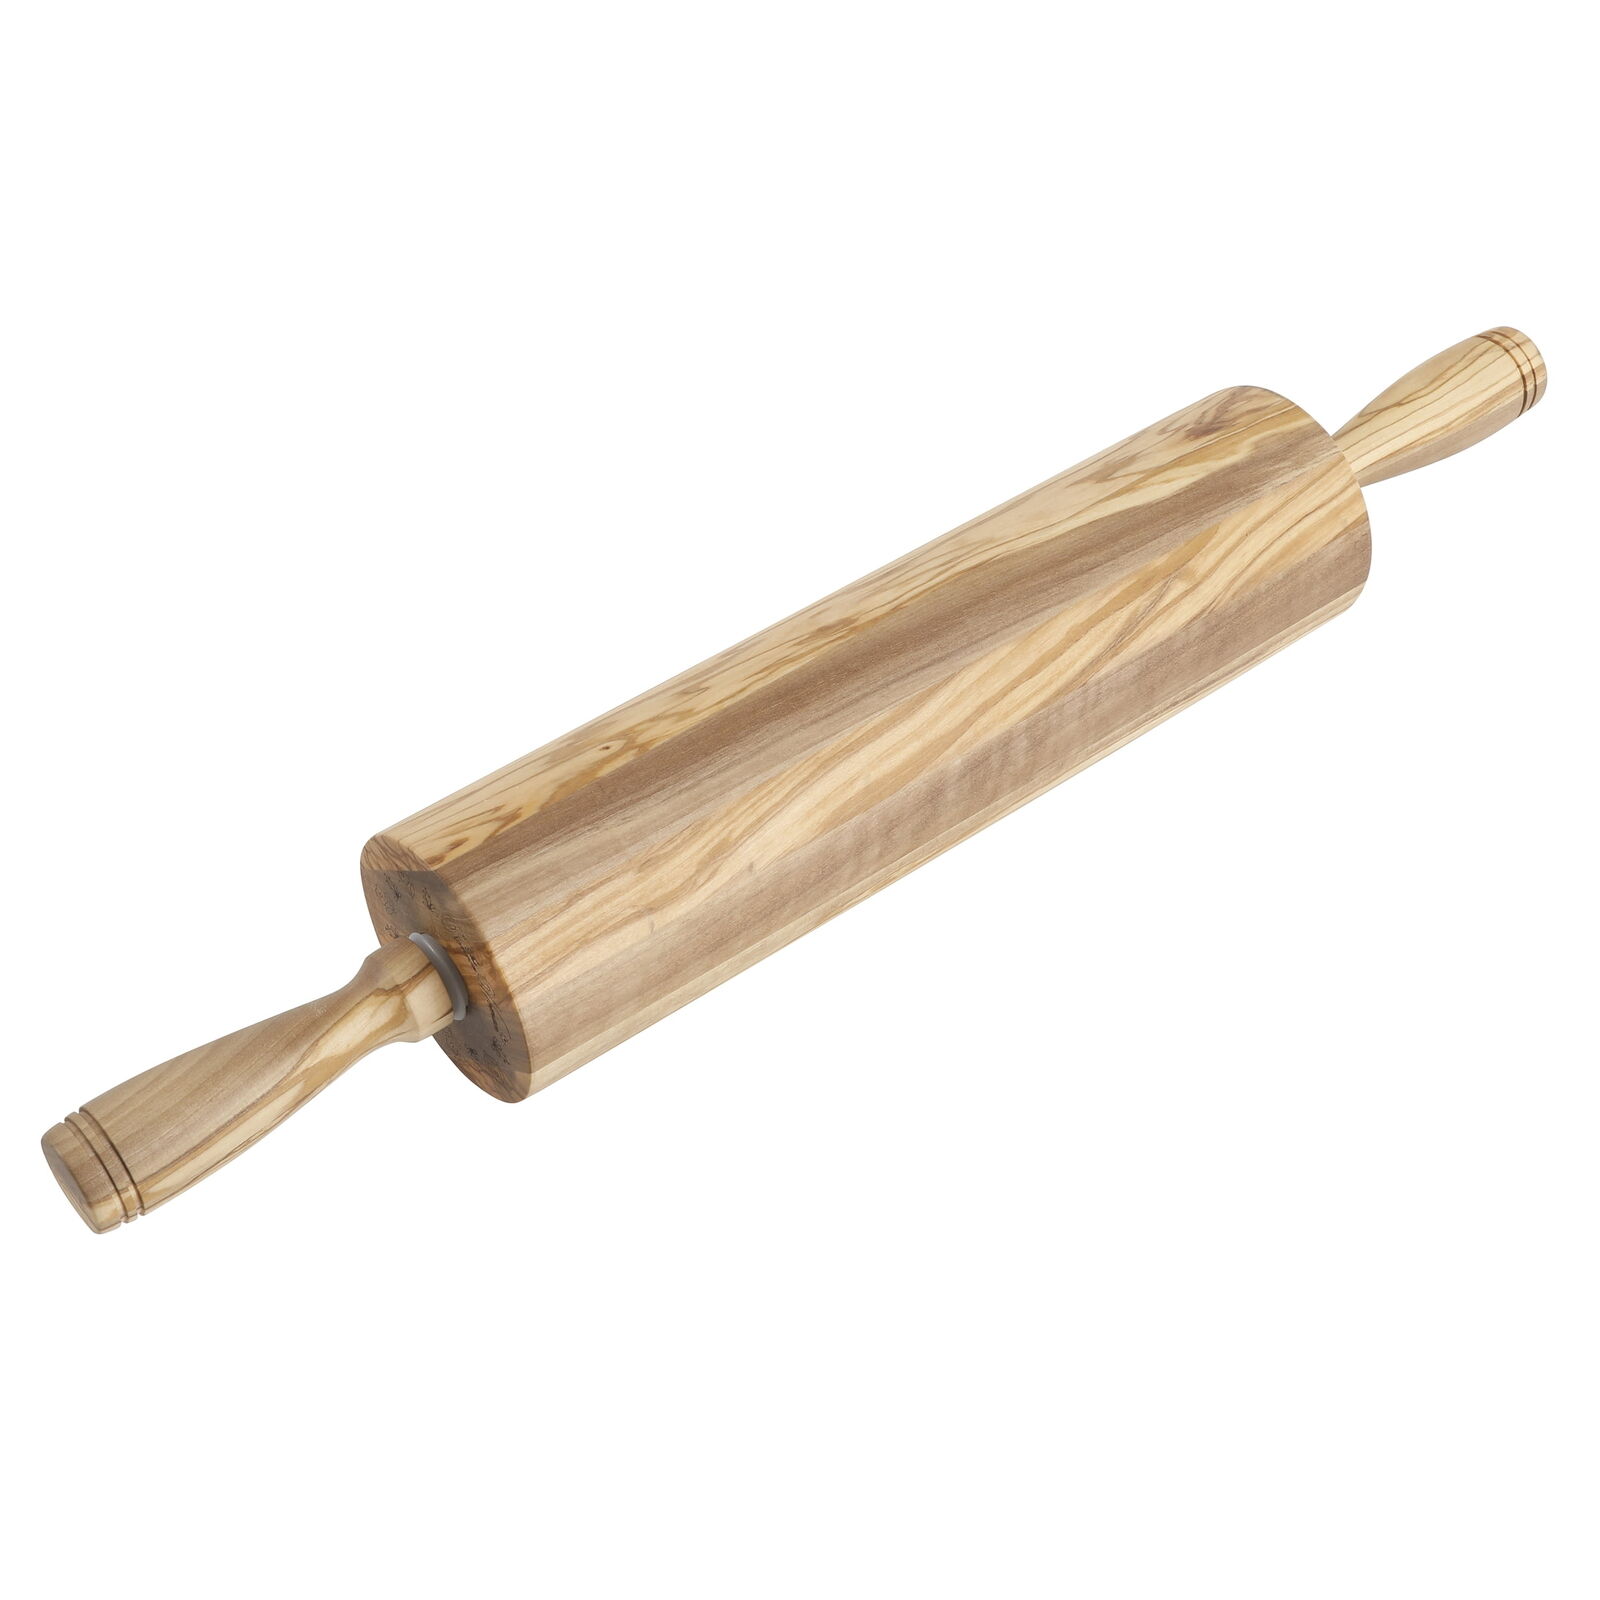 Olive Wood 19.5-inch Rolling Pin